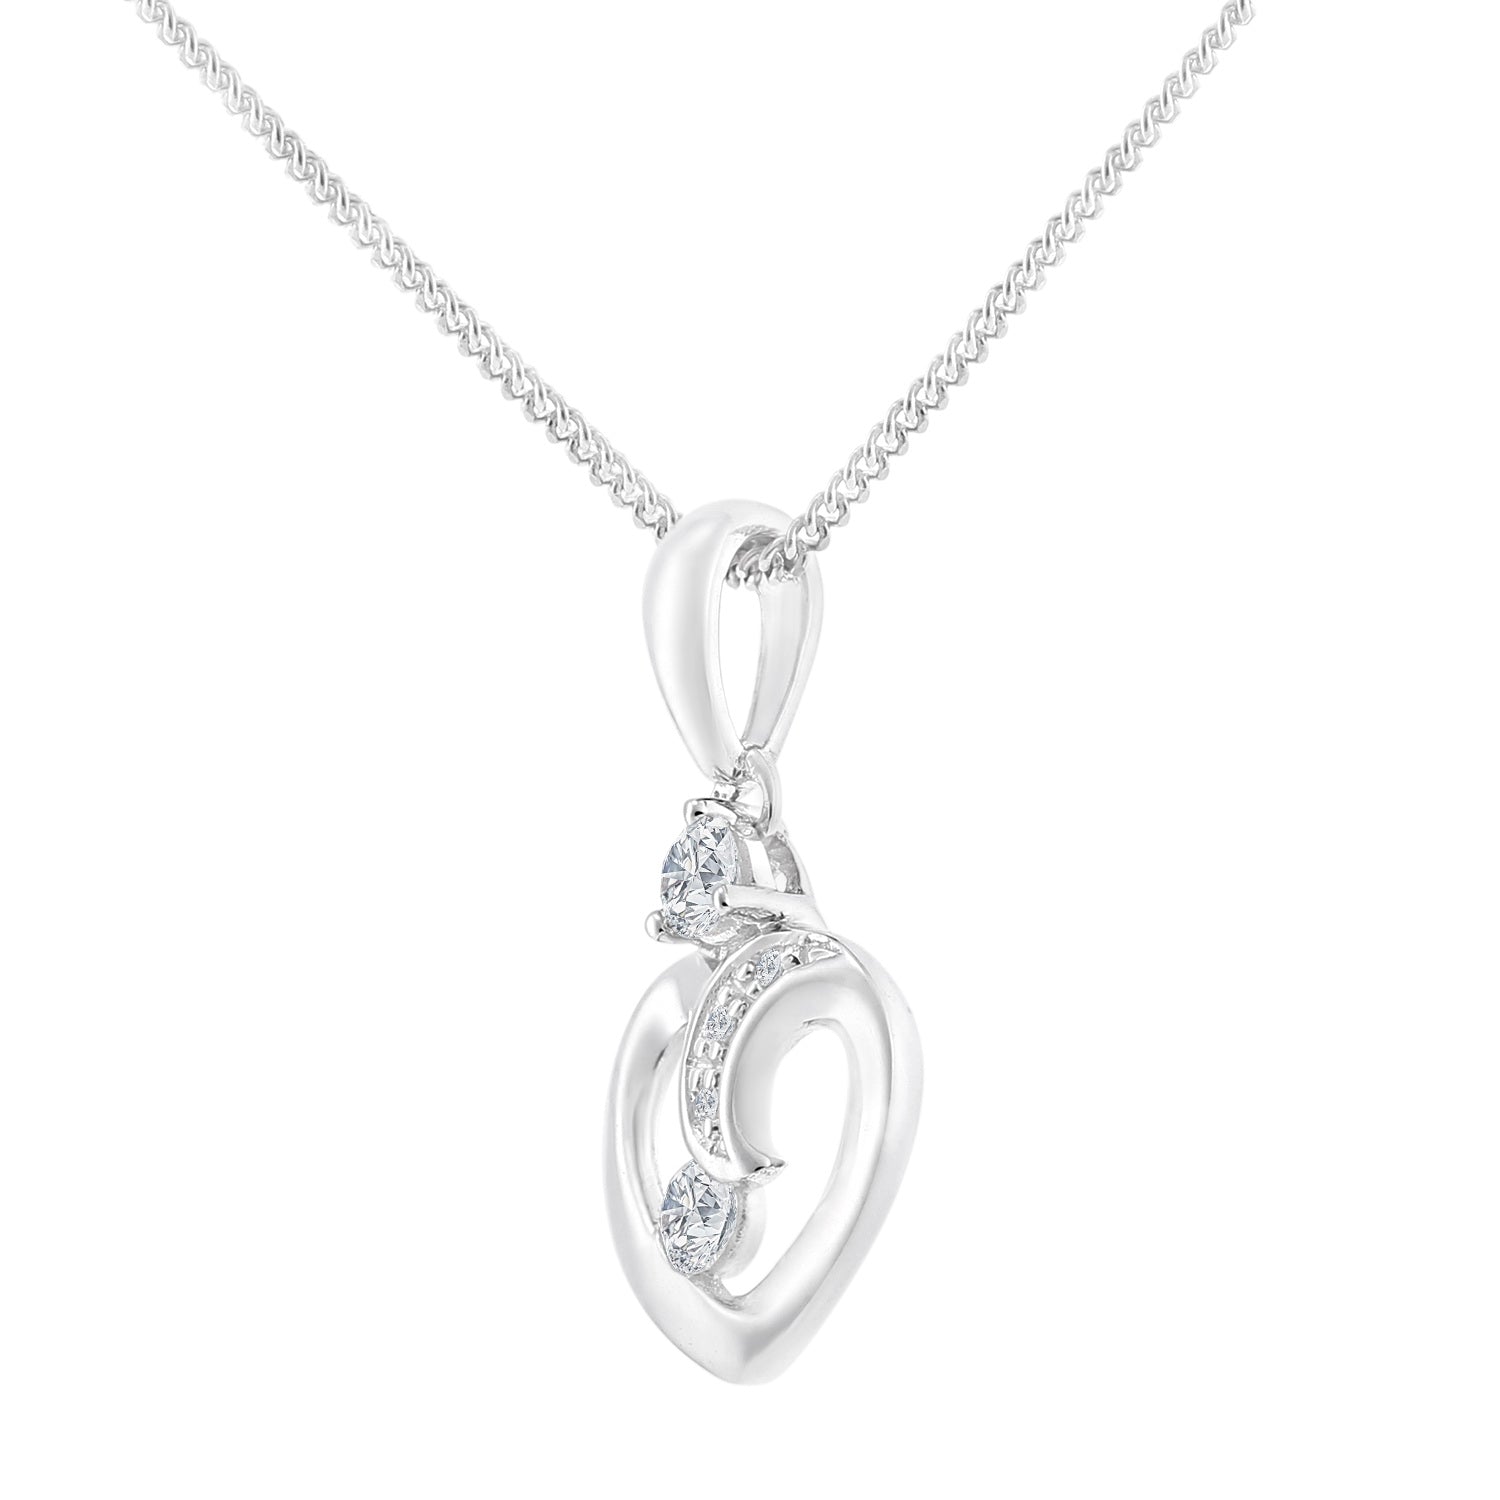 18ct White Gold  10pts Diamond 1pts Heart Pendant Necklace 18 inch - PP0AXL5984W18